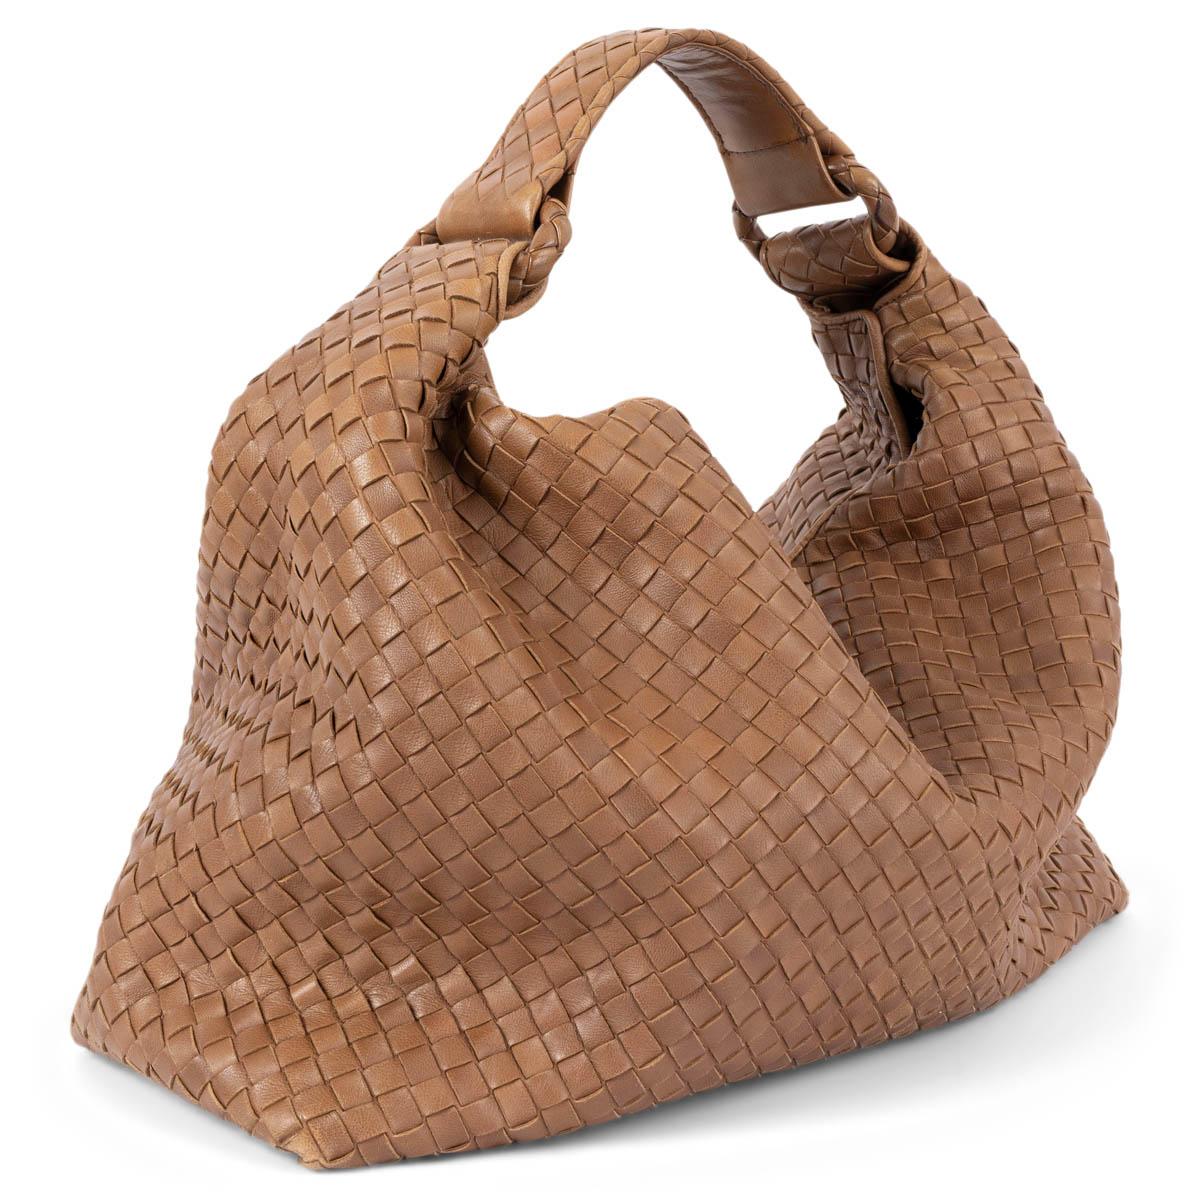 100% authentic Bottega Veneta Sloane hobo bag in tan Intrecciato leather. The design features a magnetic closure on top and is lined in beige canvas with one zipper pocket against the back. Has been carried and shows some wear to the corners and